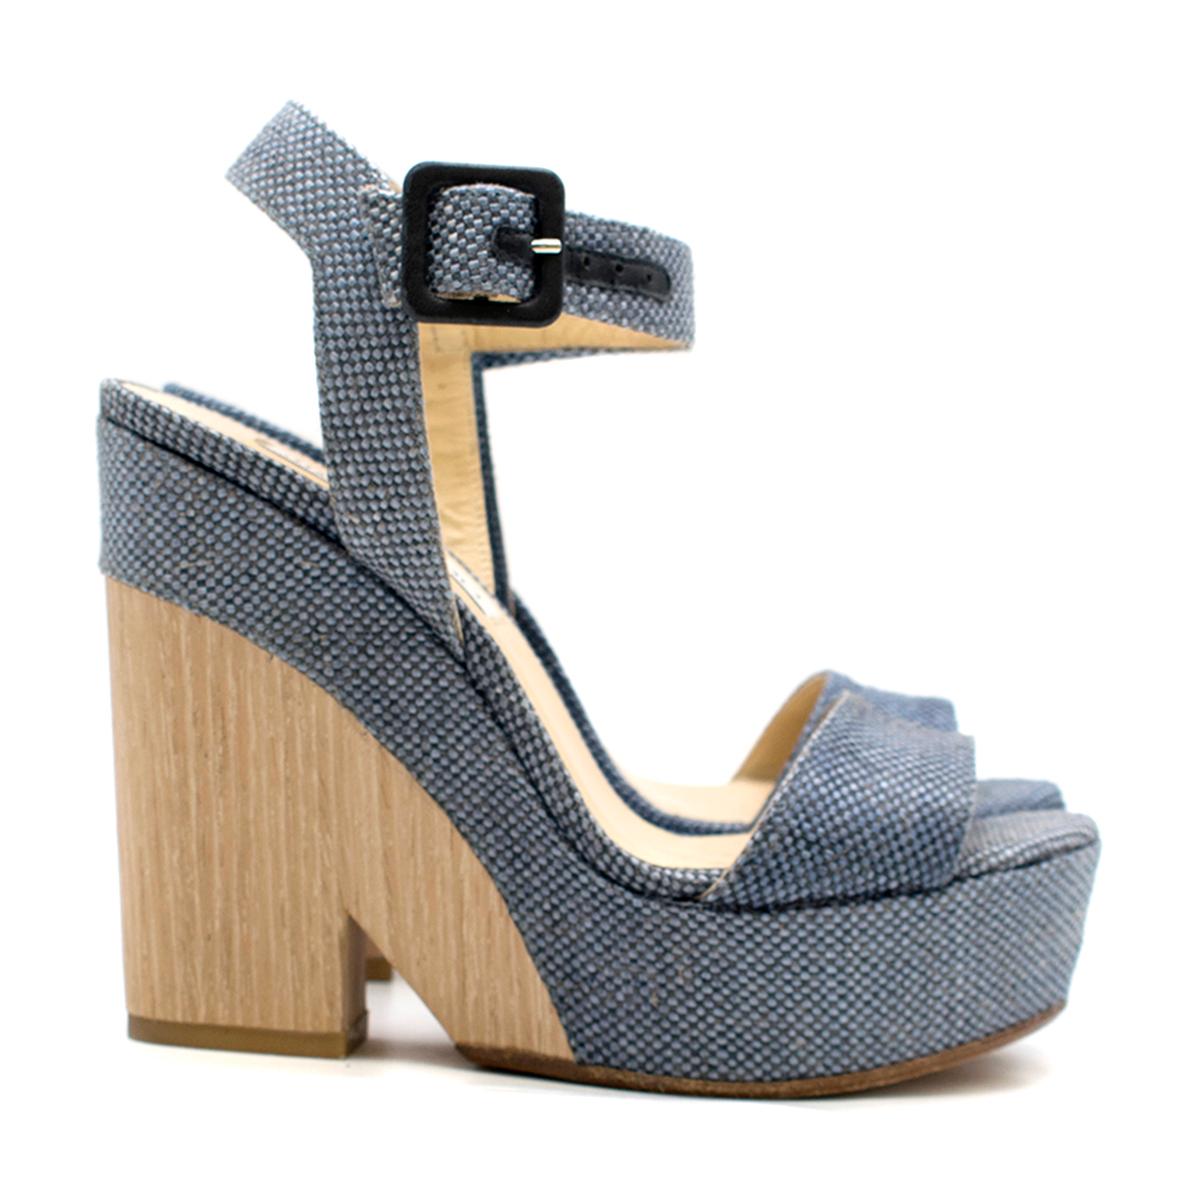 Jimmy Choo Blue Fine Raffia Nico 125 Wedge

- Blue woven 
- Fine raffia upper
- Leather trim
- Ankle strap buckle fastening
- Open toe
- Wood-effect wedge
- Nude leather lining with logo embossed
- This item comes with the original shoe box.

Please